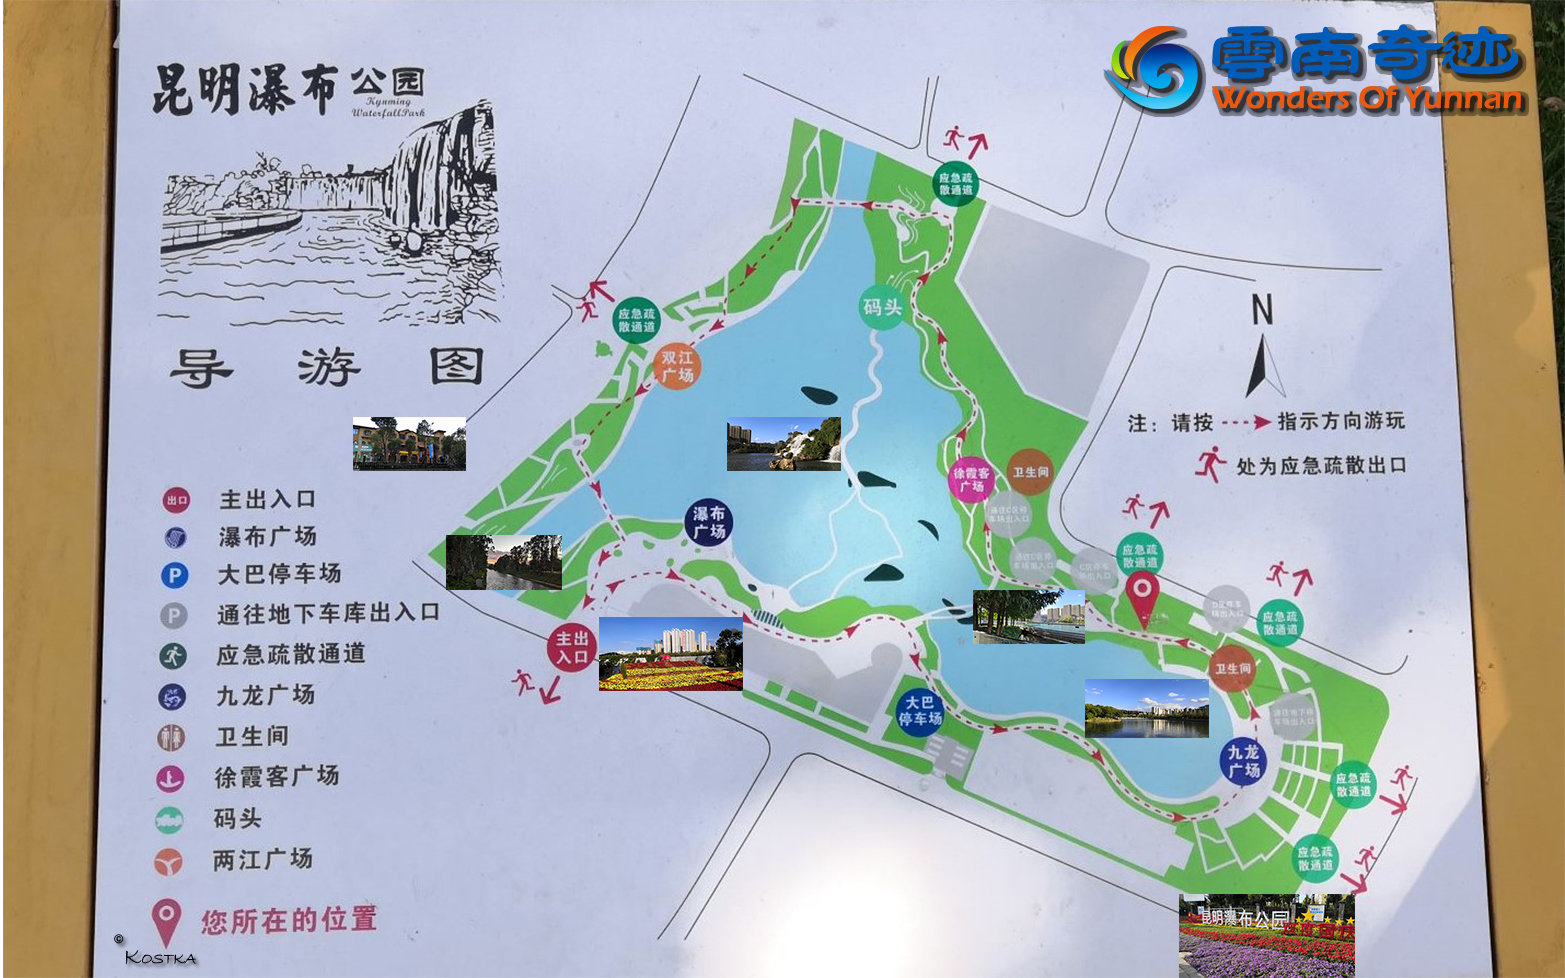 Map of the pathway, emergency exits and attractions of the Waterfall Park in Kunming